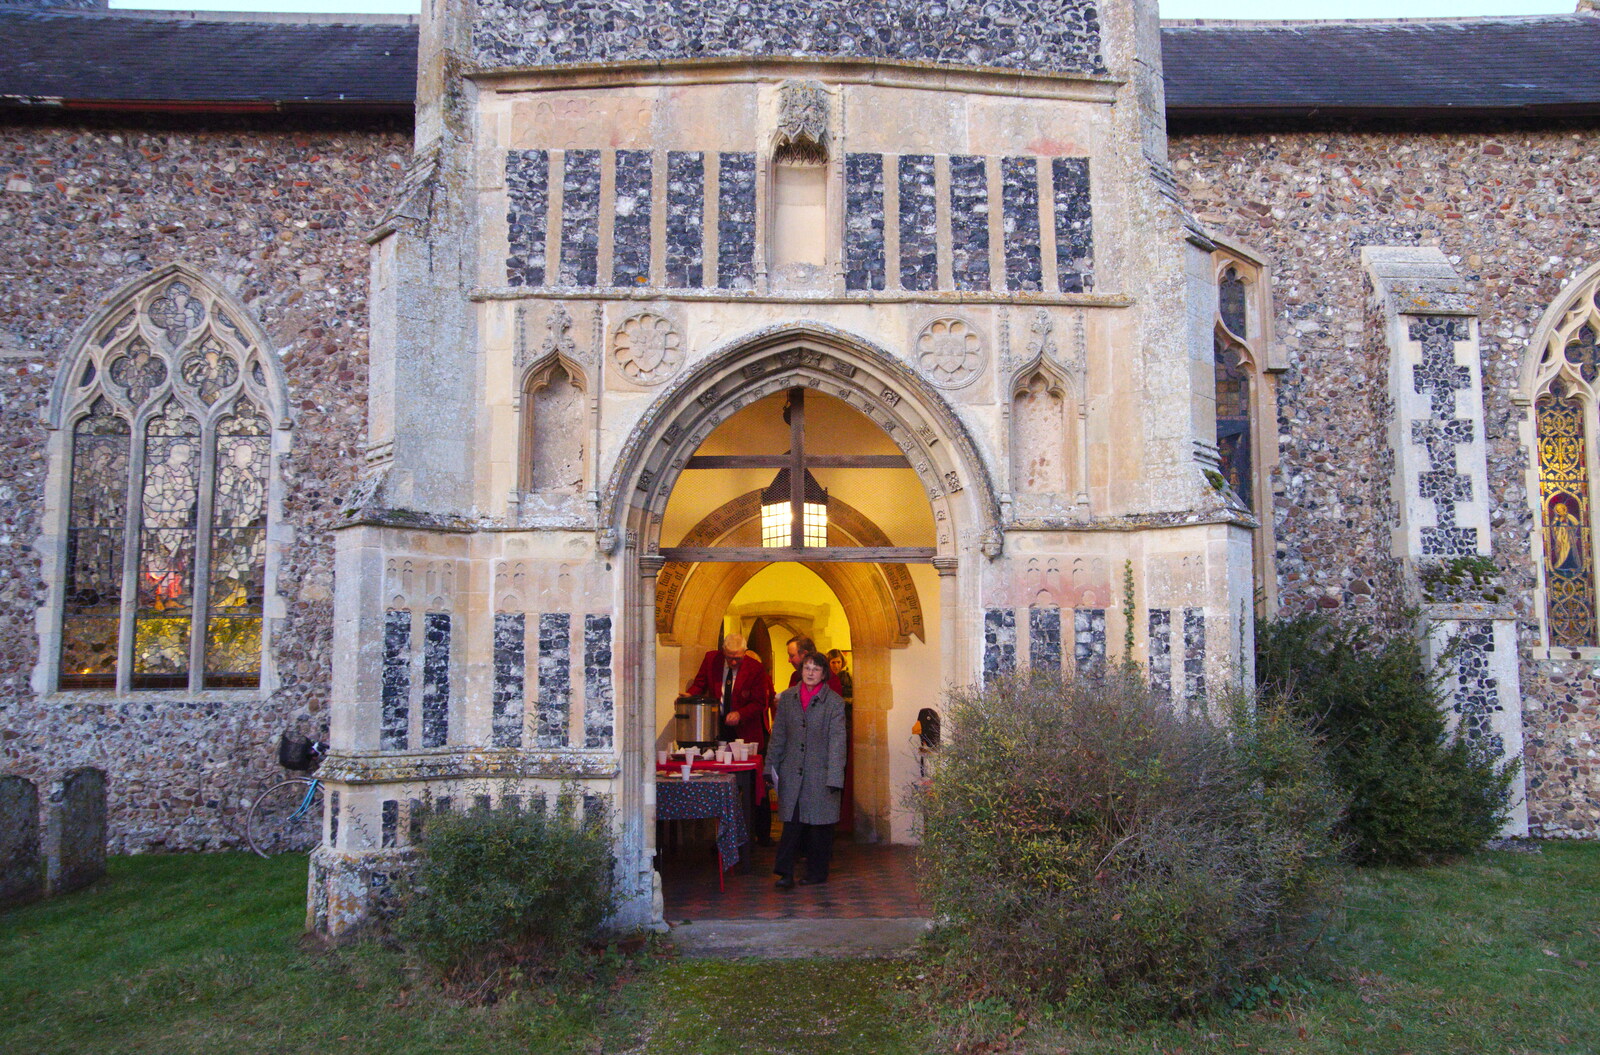 The entrance to the church from The GSB at Thornham Magna and Yaxley Cherry Tree, Suffolk - 15th December 2019